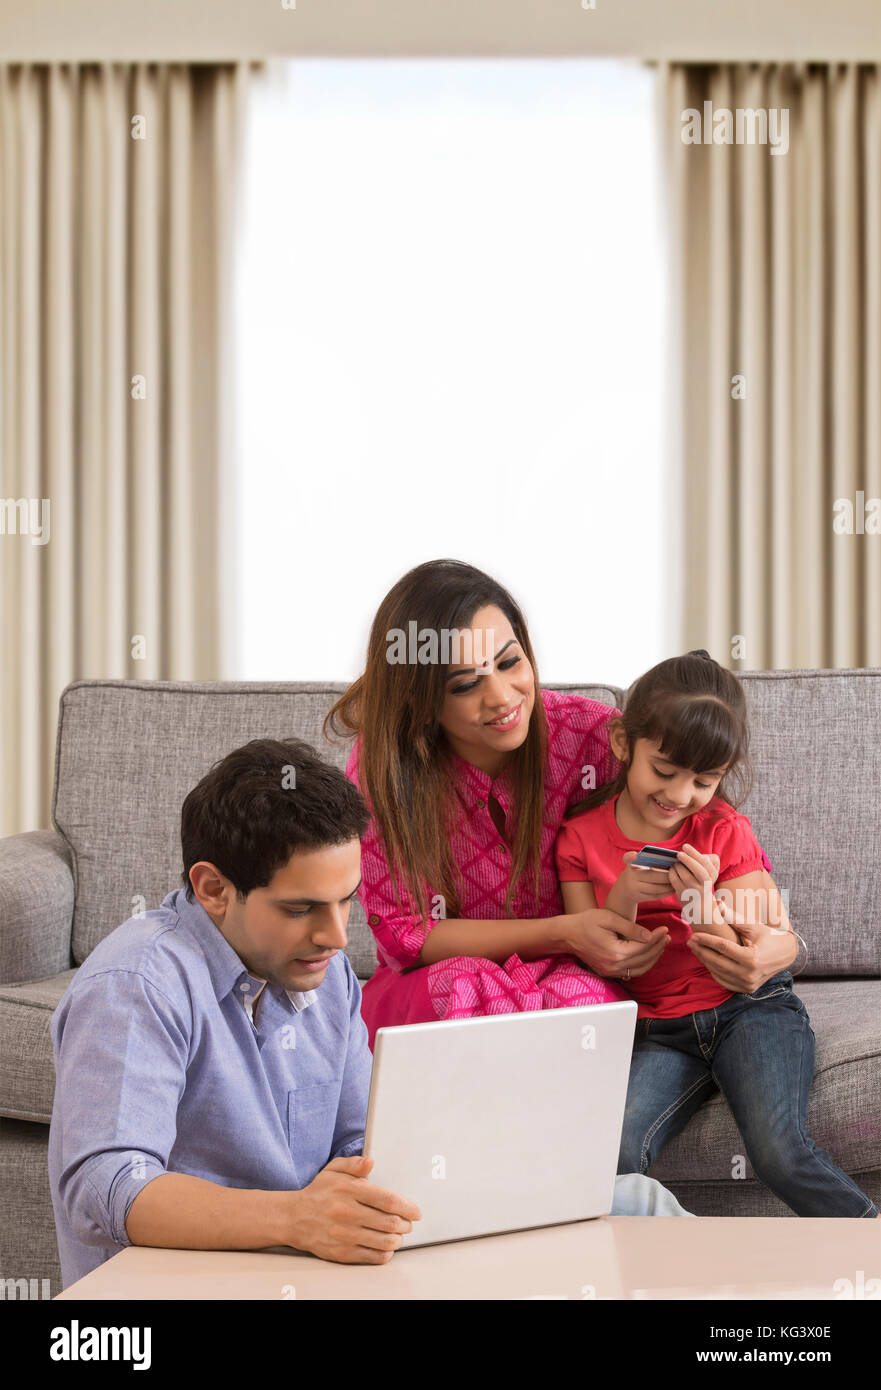 Family using credit card for shopping online Stock Photo